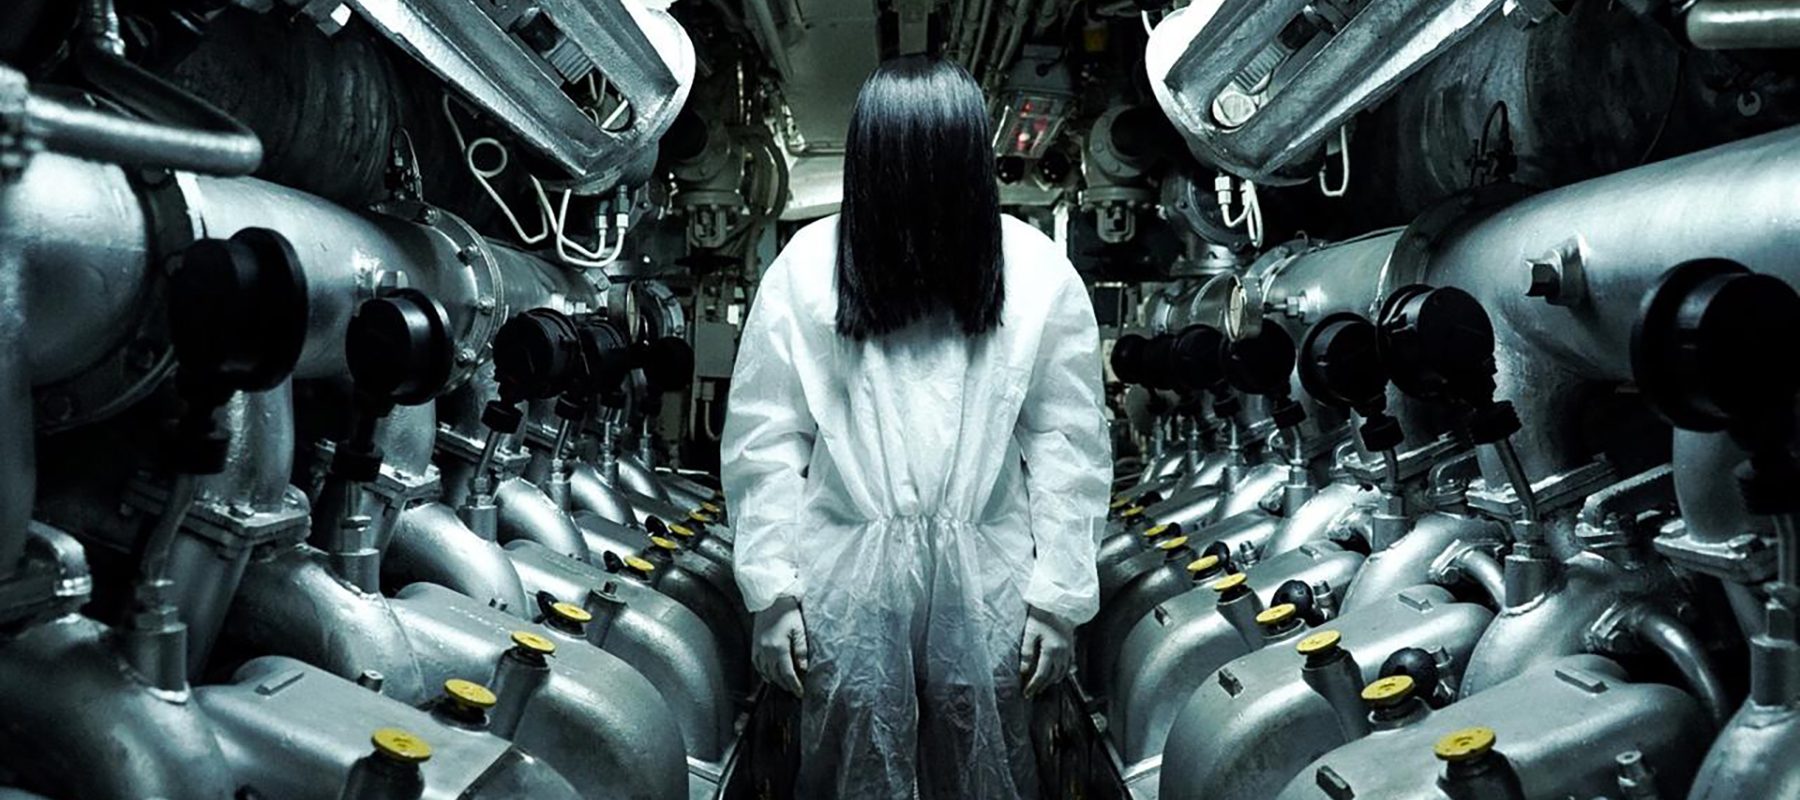 A person with long, black hair hiding their face stands between two rows of unidentified silver machines.